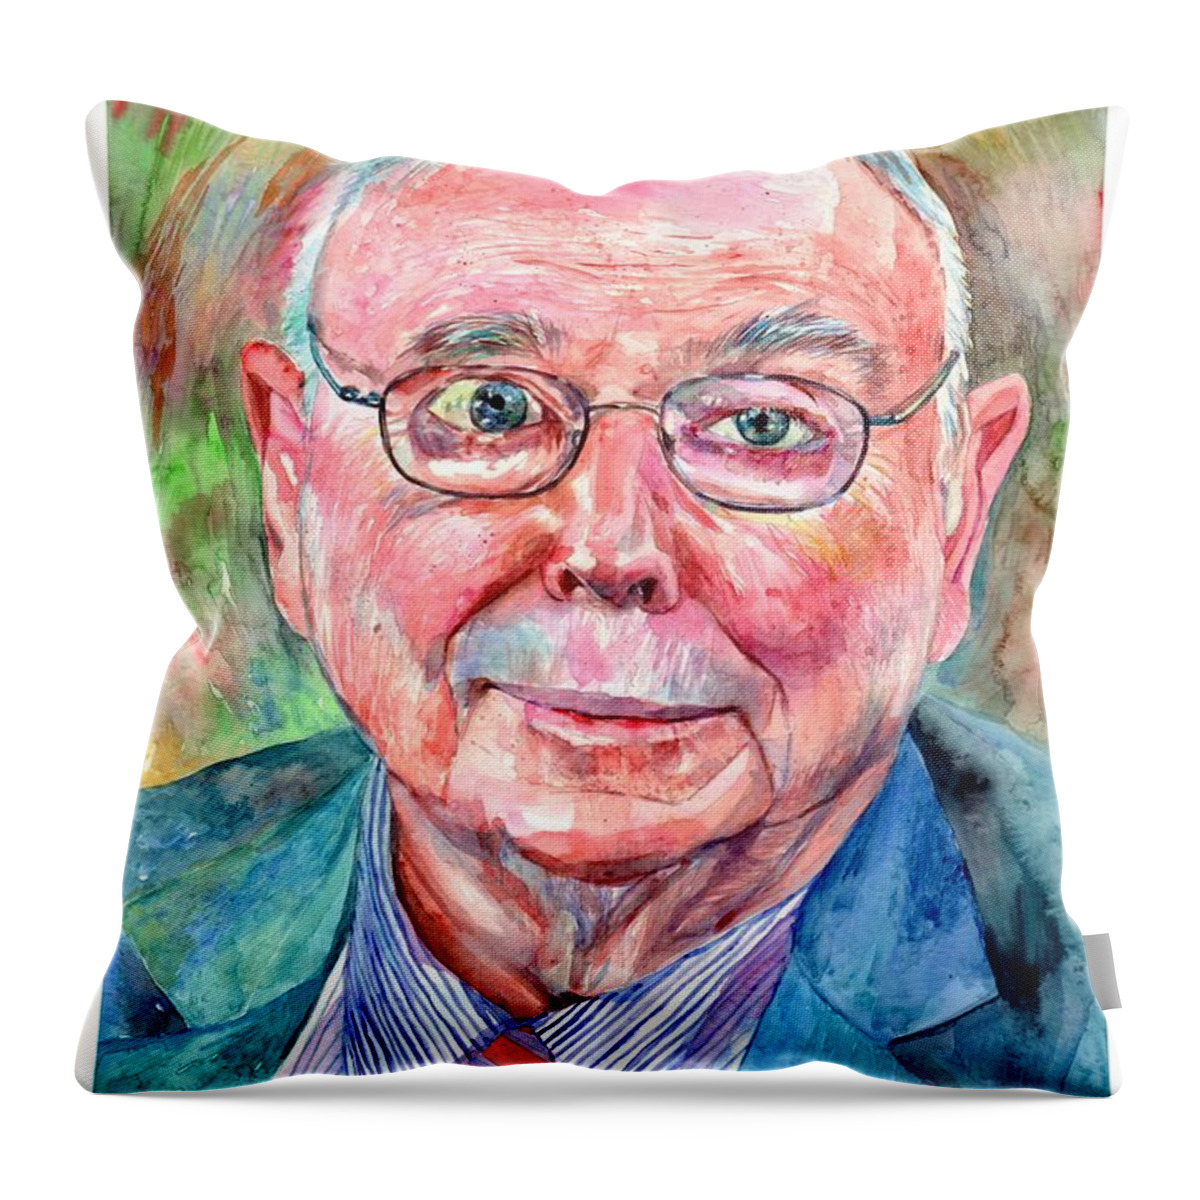 Charlie Throw Pillow featuring the painting Charlie Munger Portrait by Suzann Sines